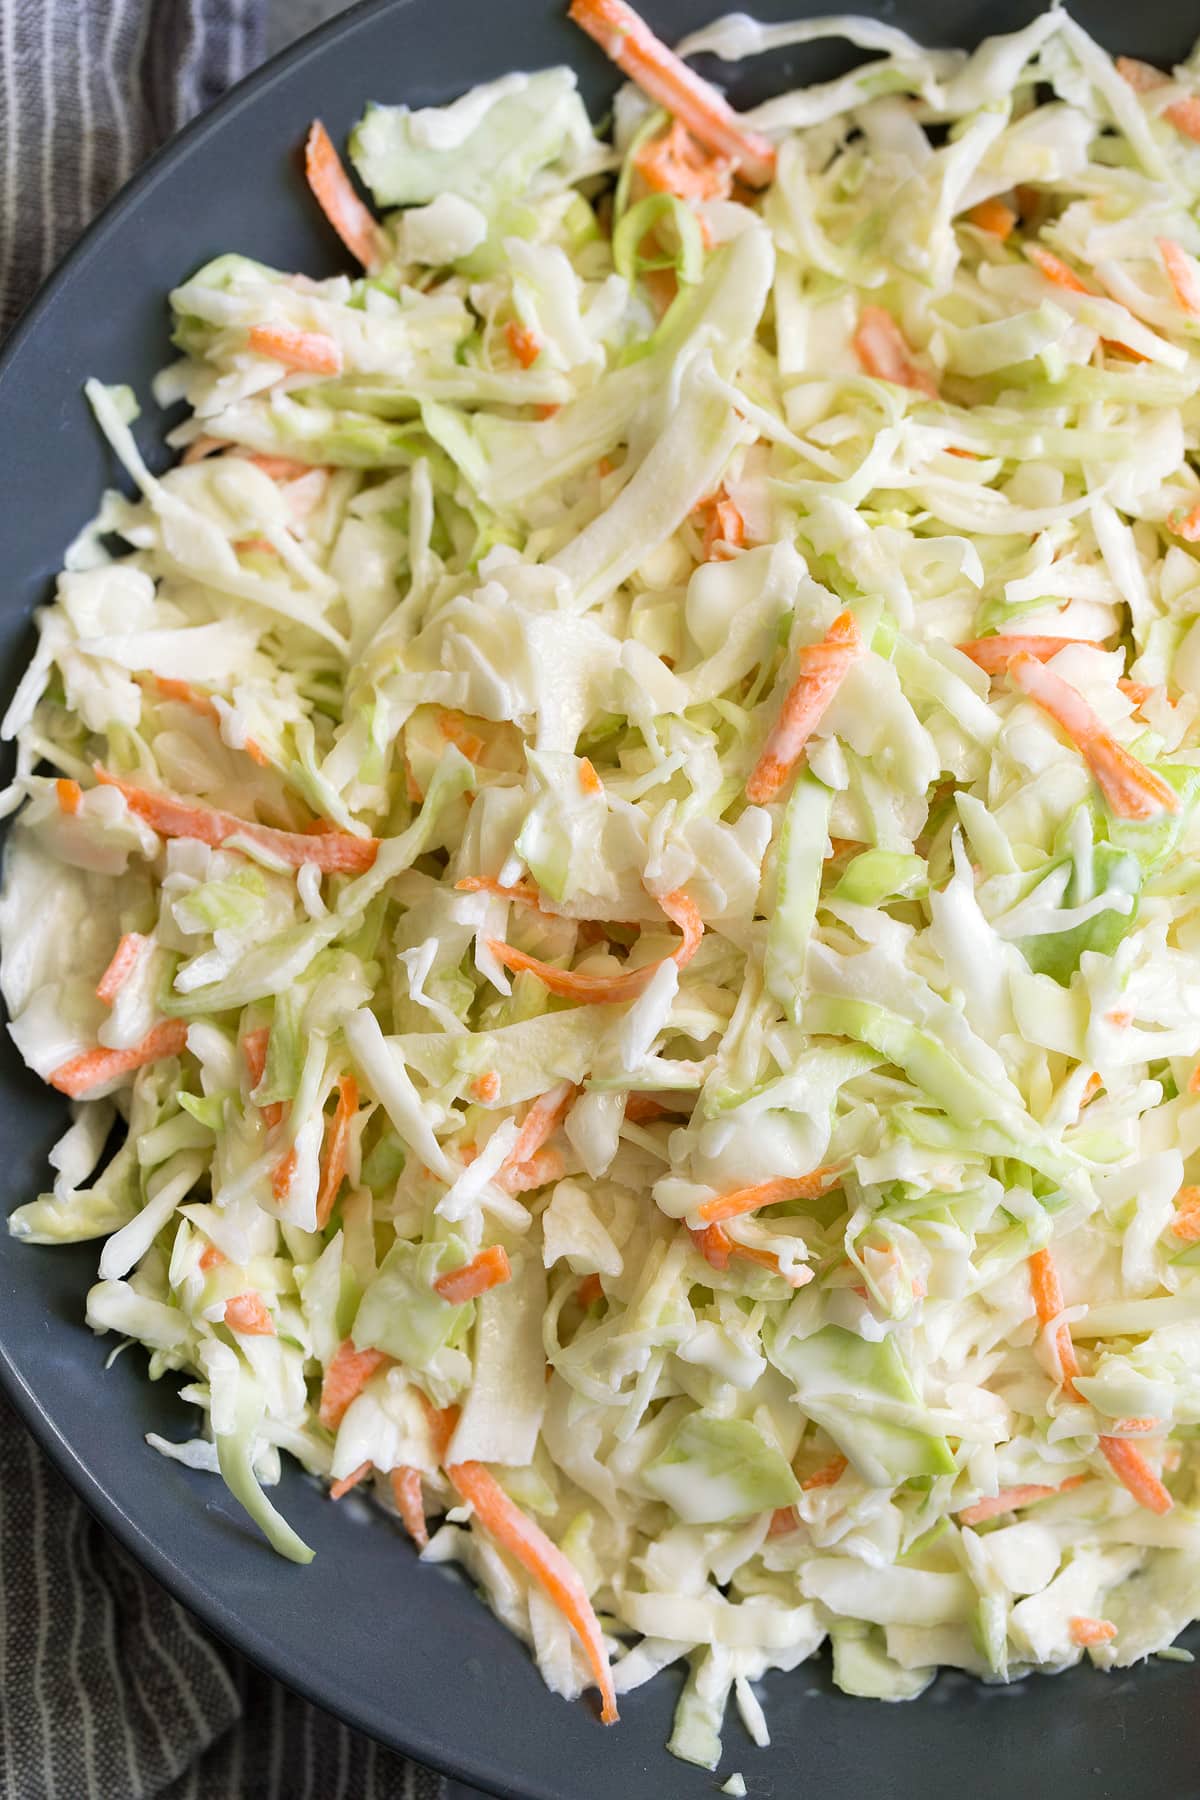 Close up image of coleslaw with dressing in a dark blue bowl.